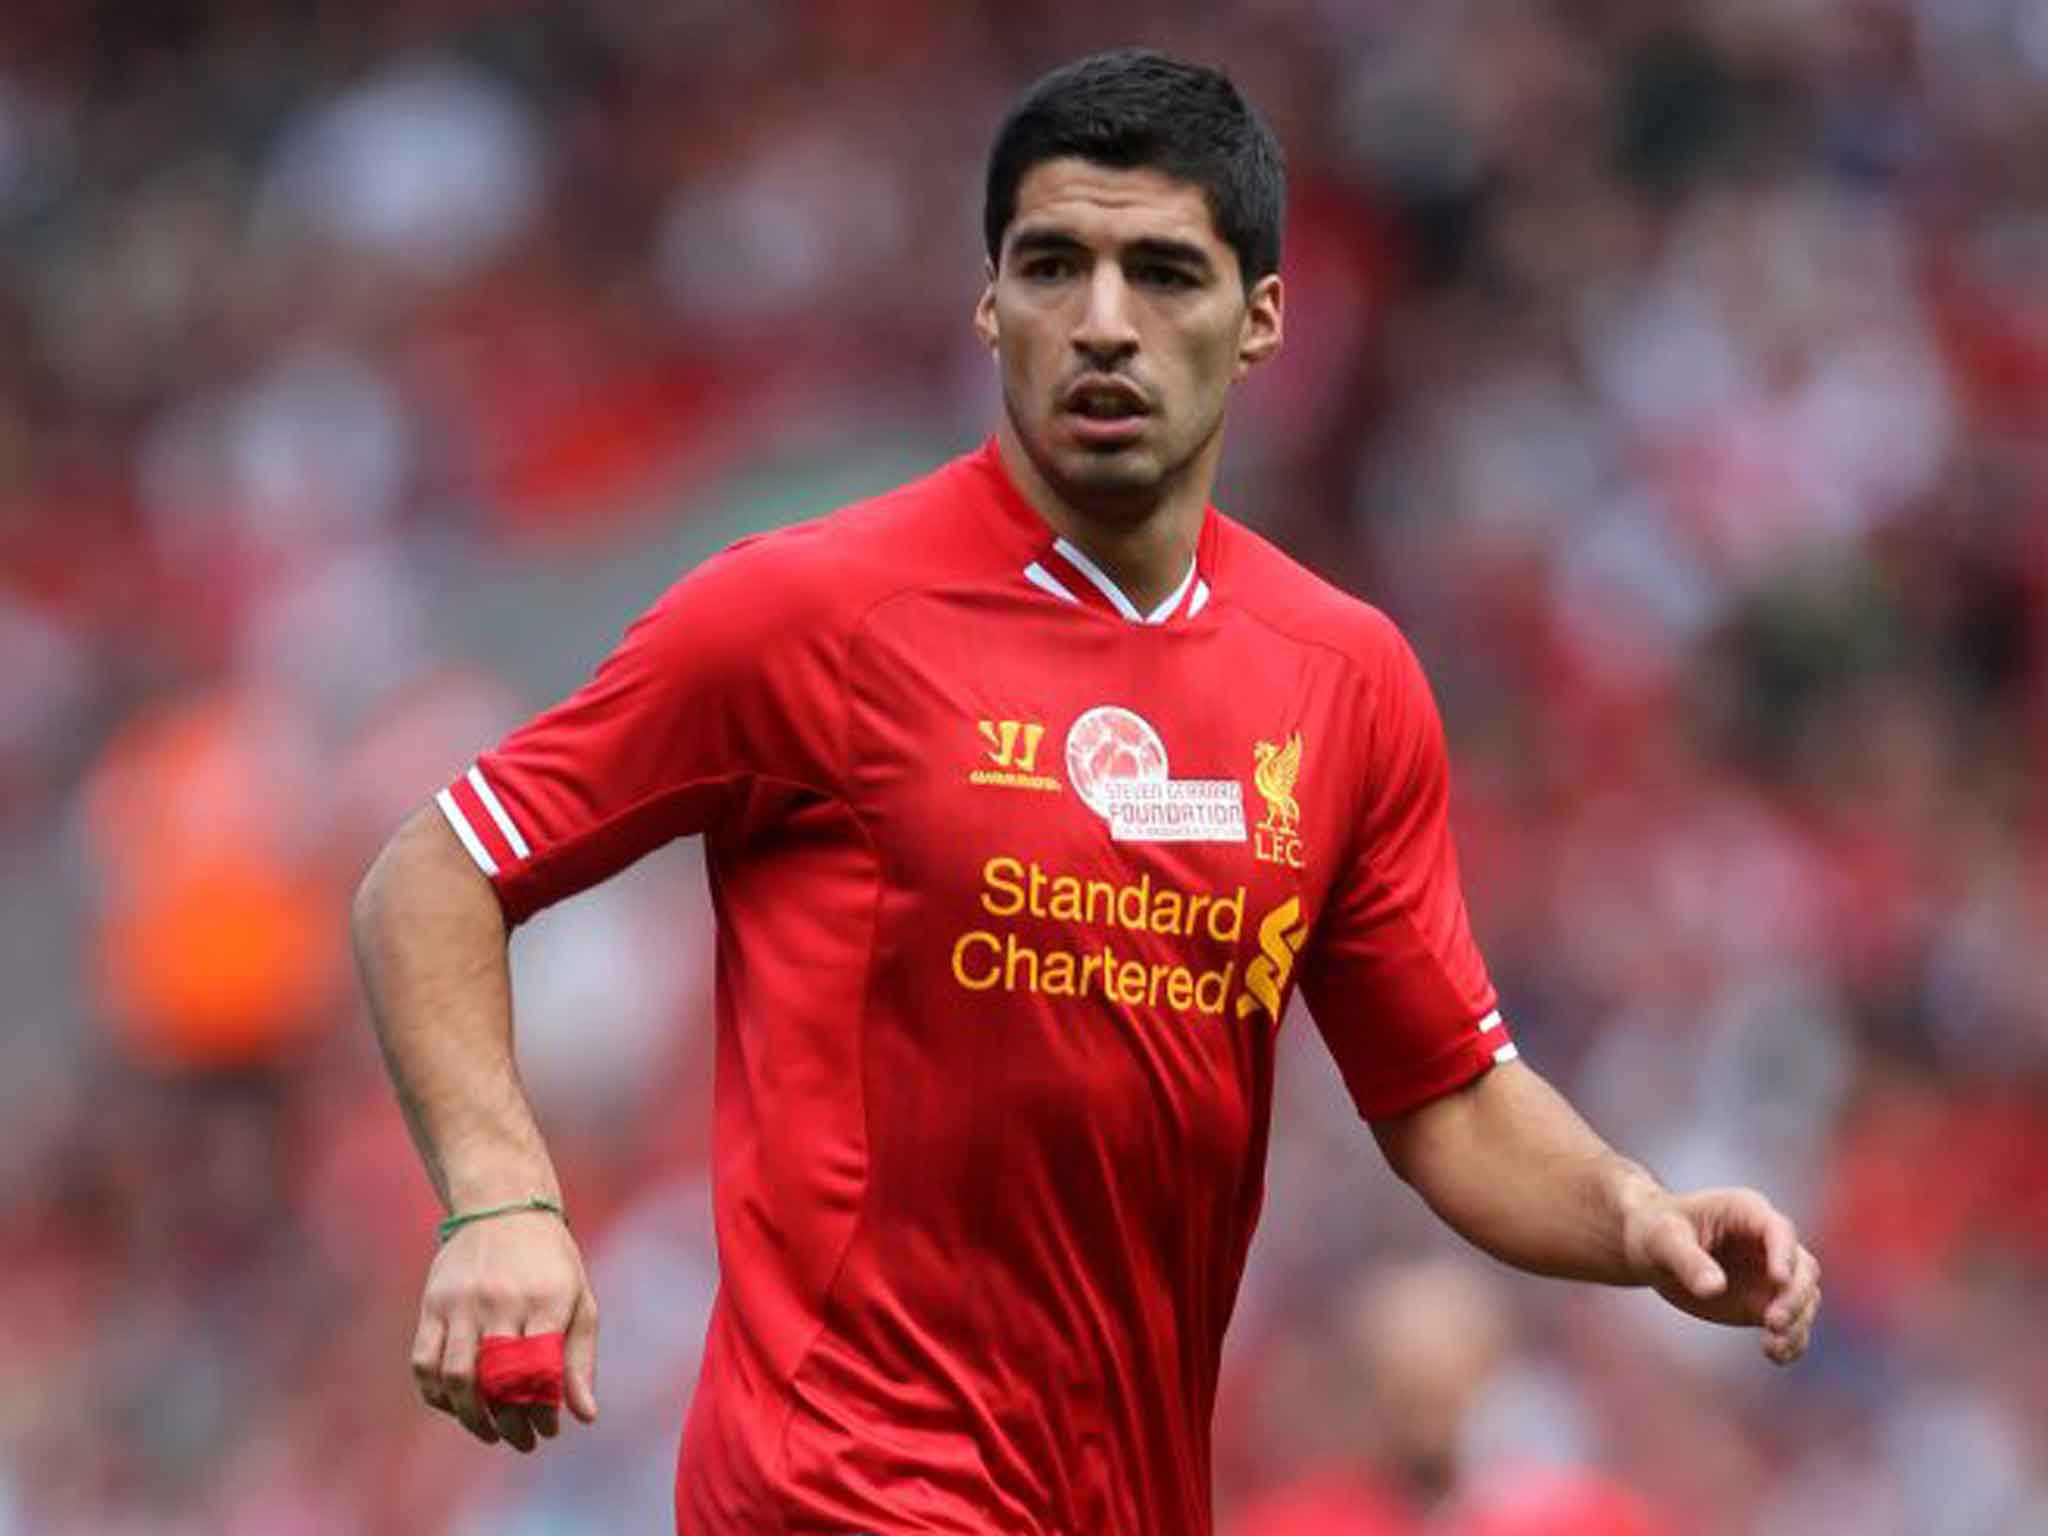 Suarez has arrived back on Merseyside after international duty with Uruguay